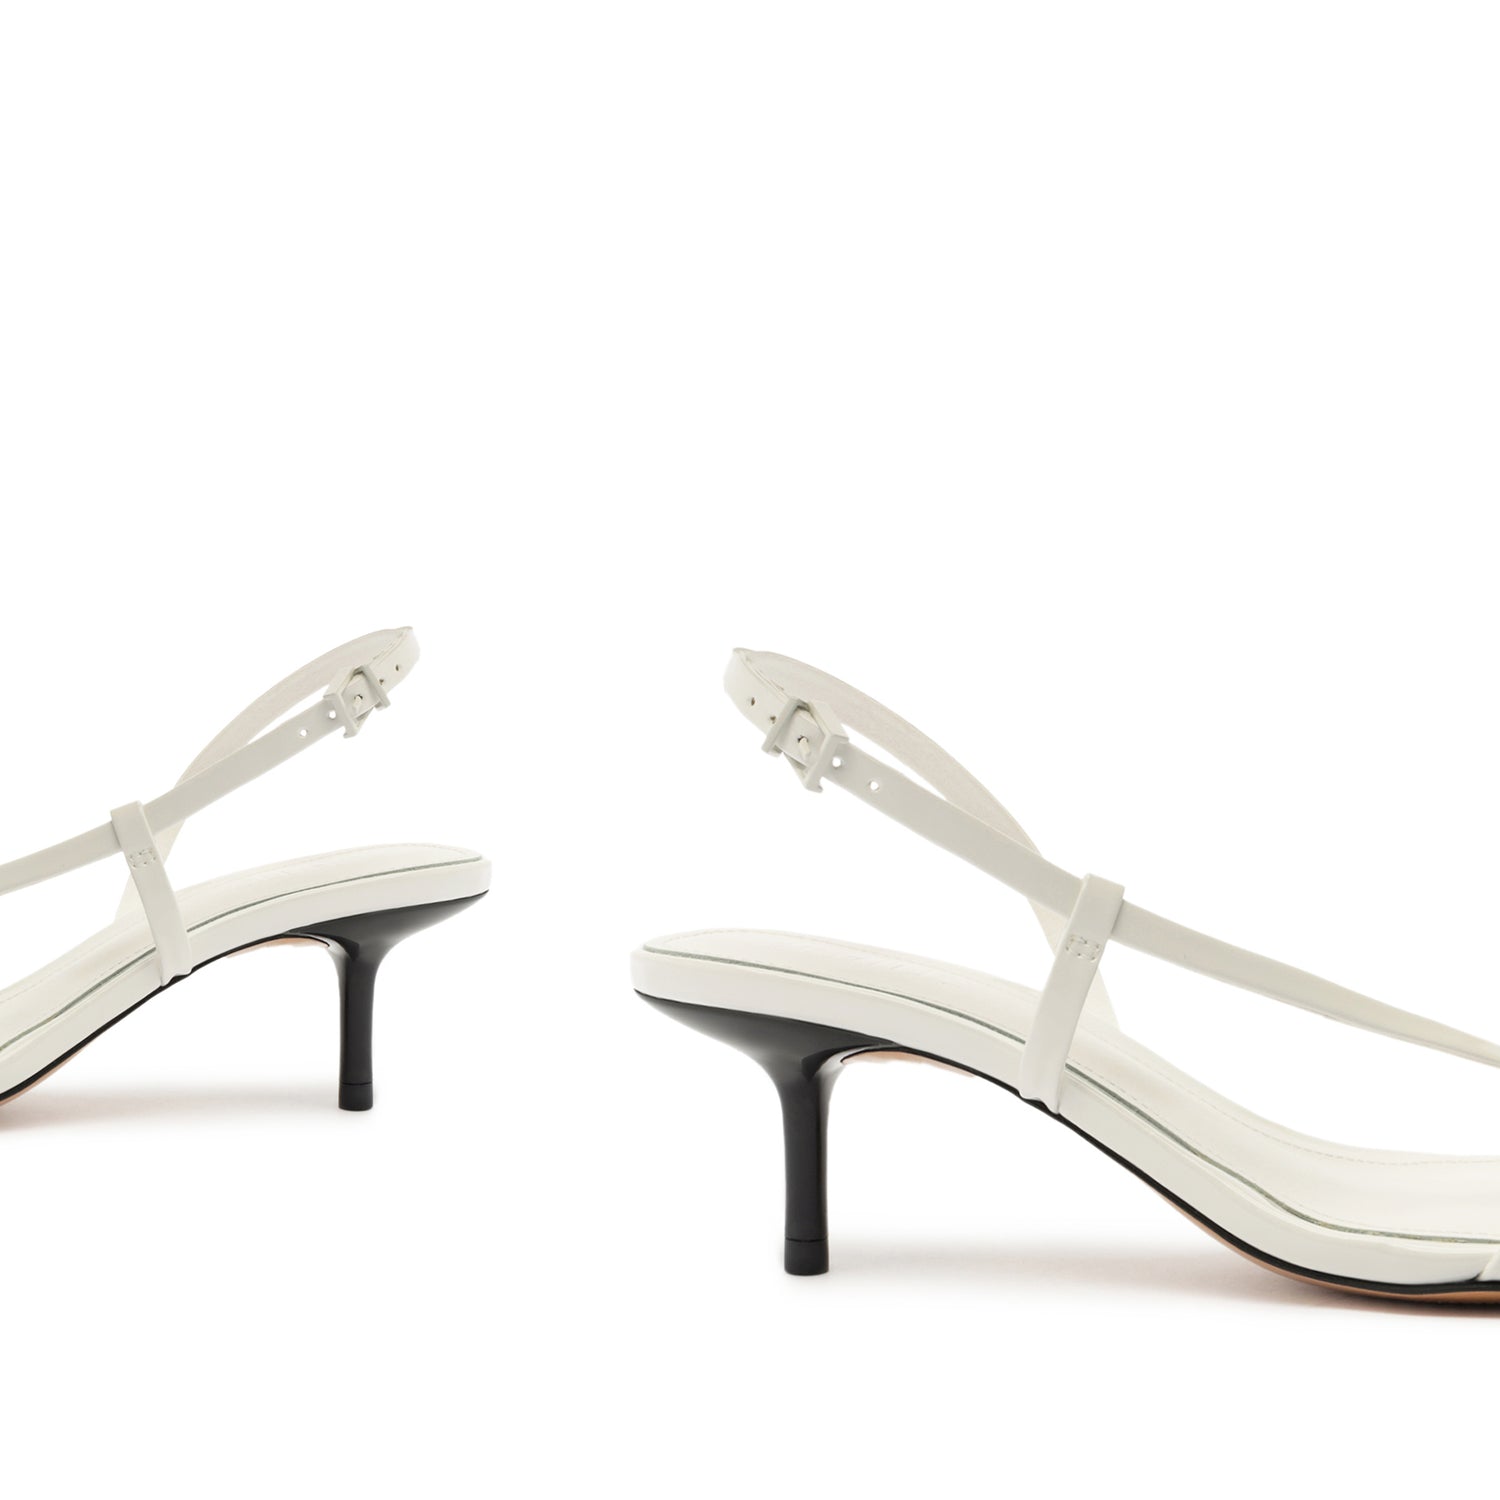 Heloise Patent Leather Sandal Sandals FALL 23    - Schutz Shoes